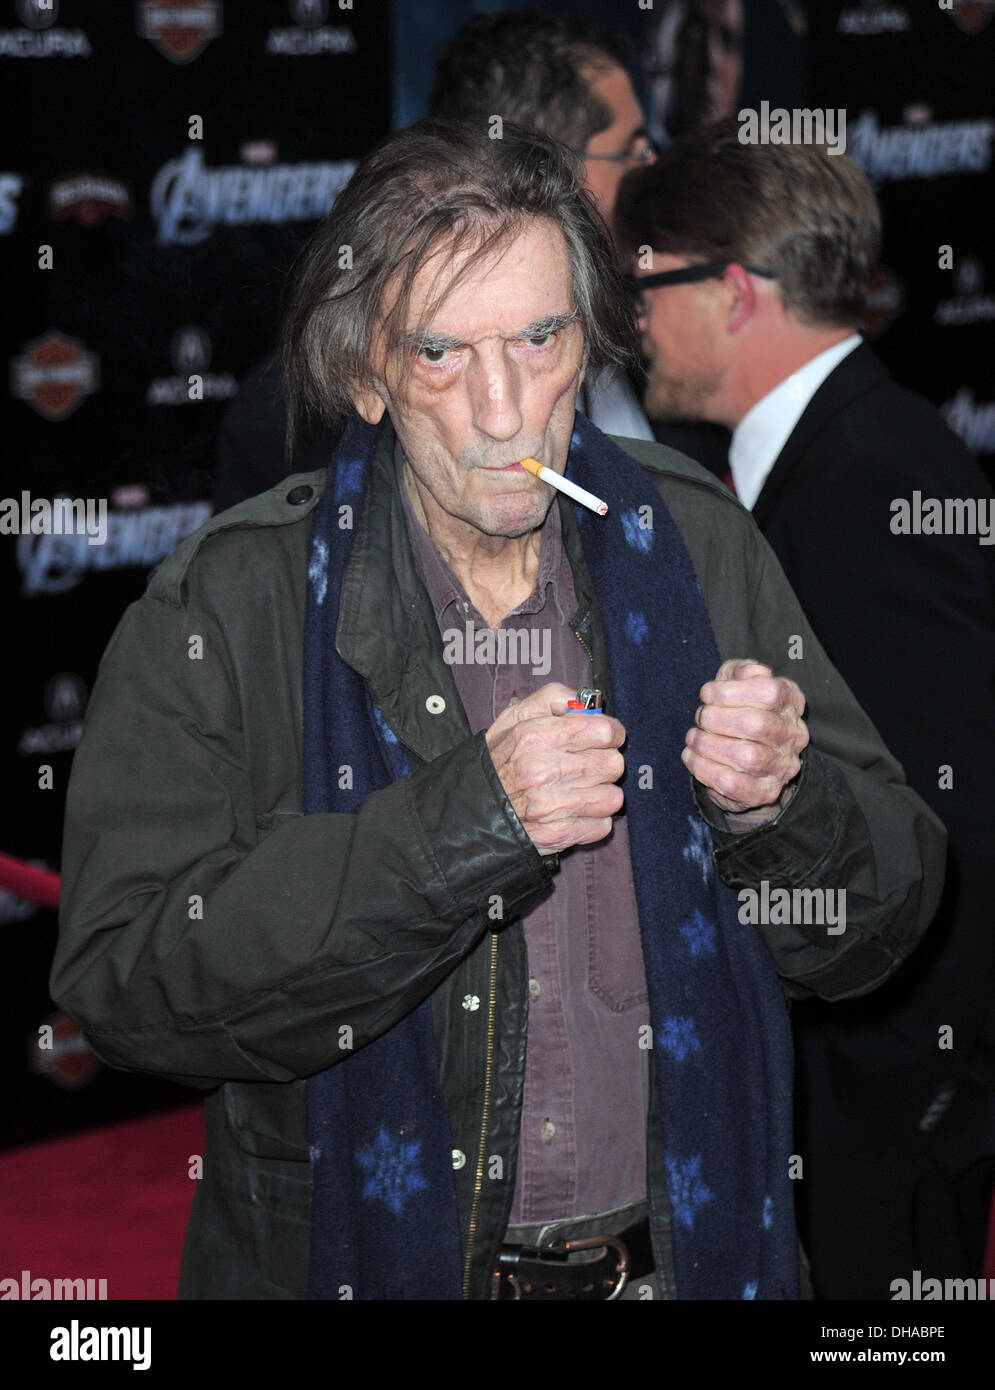 Harry Dean Stanton World Premiere of "The Avengers" at El Capitan Theatre - Arrivals Hollywood California - 11.04.12 Stock Photo